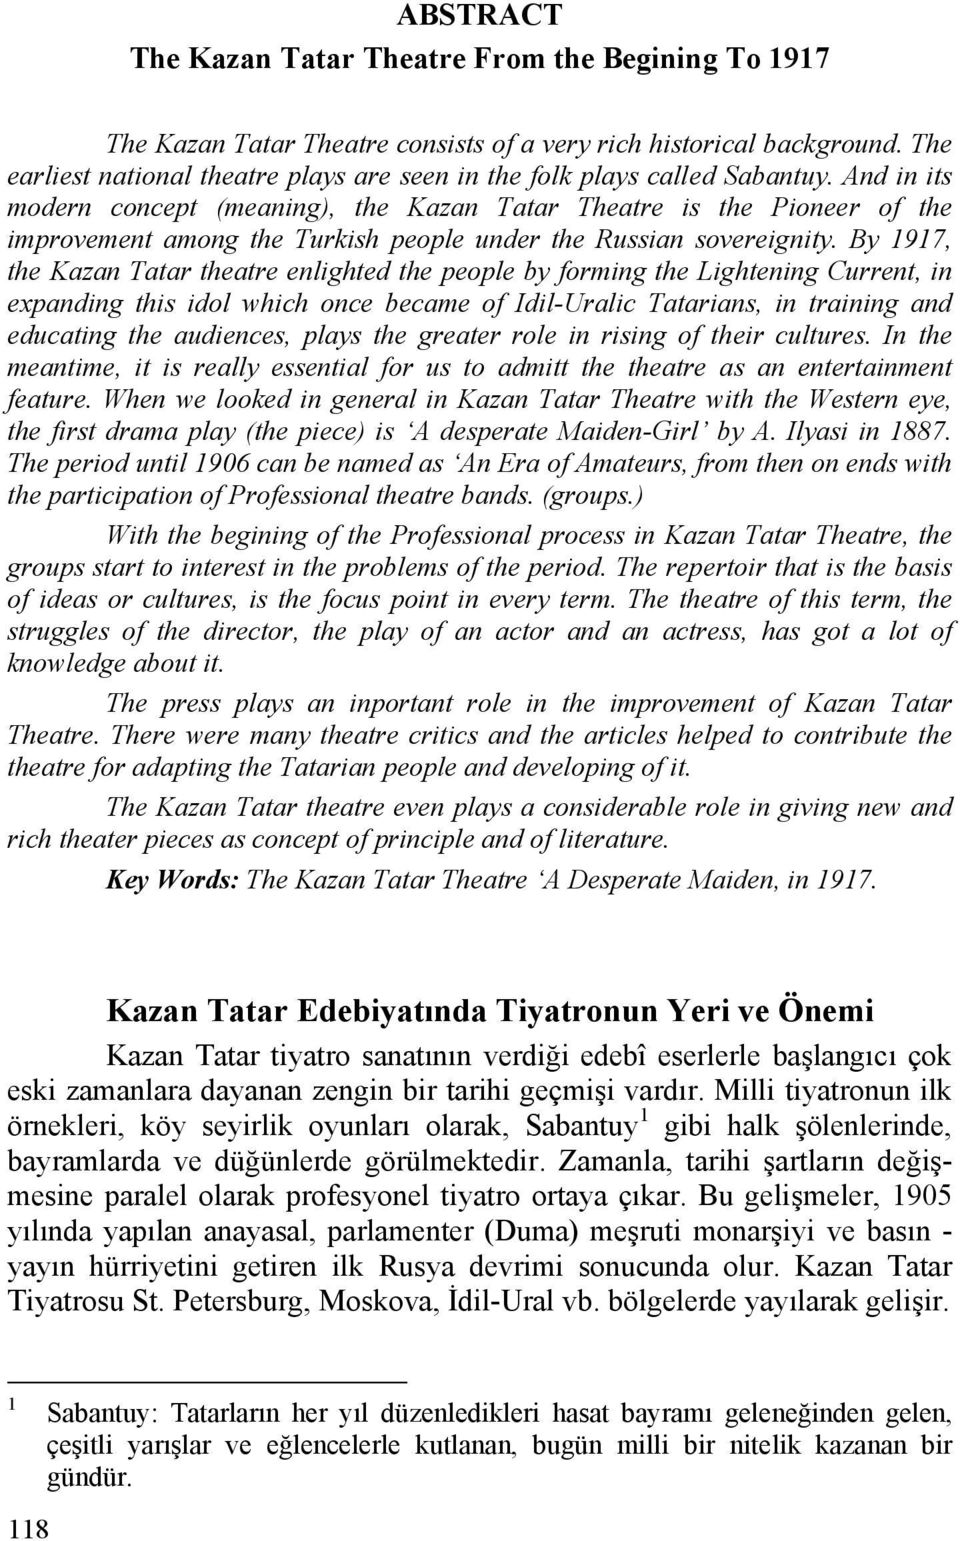 And in its modern concept (meaning), the Kazan Tatar Theatre is the Pioneer of the improvement among the Turkish people under the Russian sovereignity.